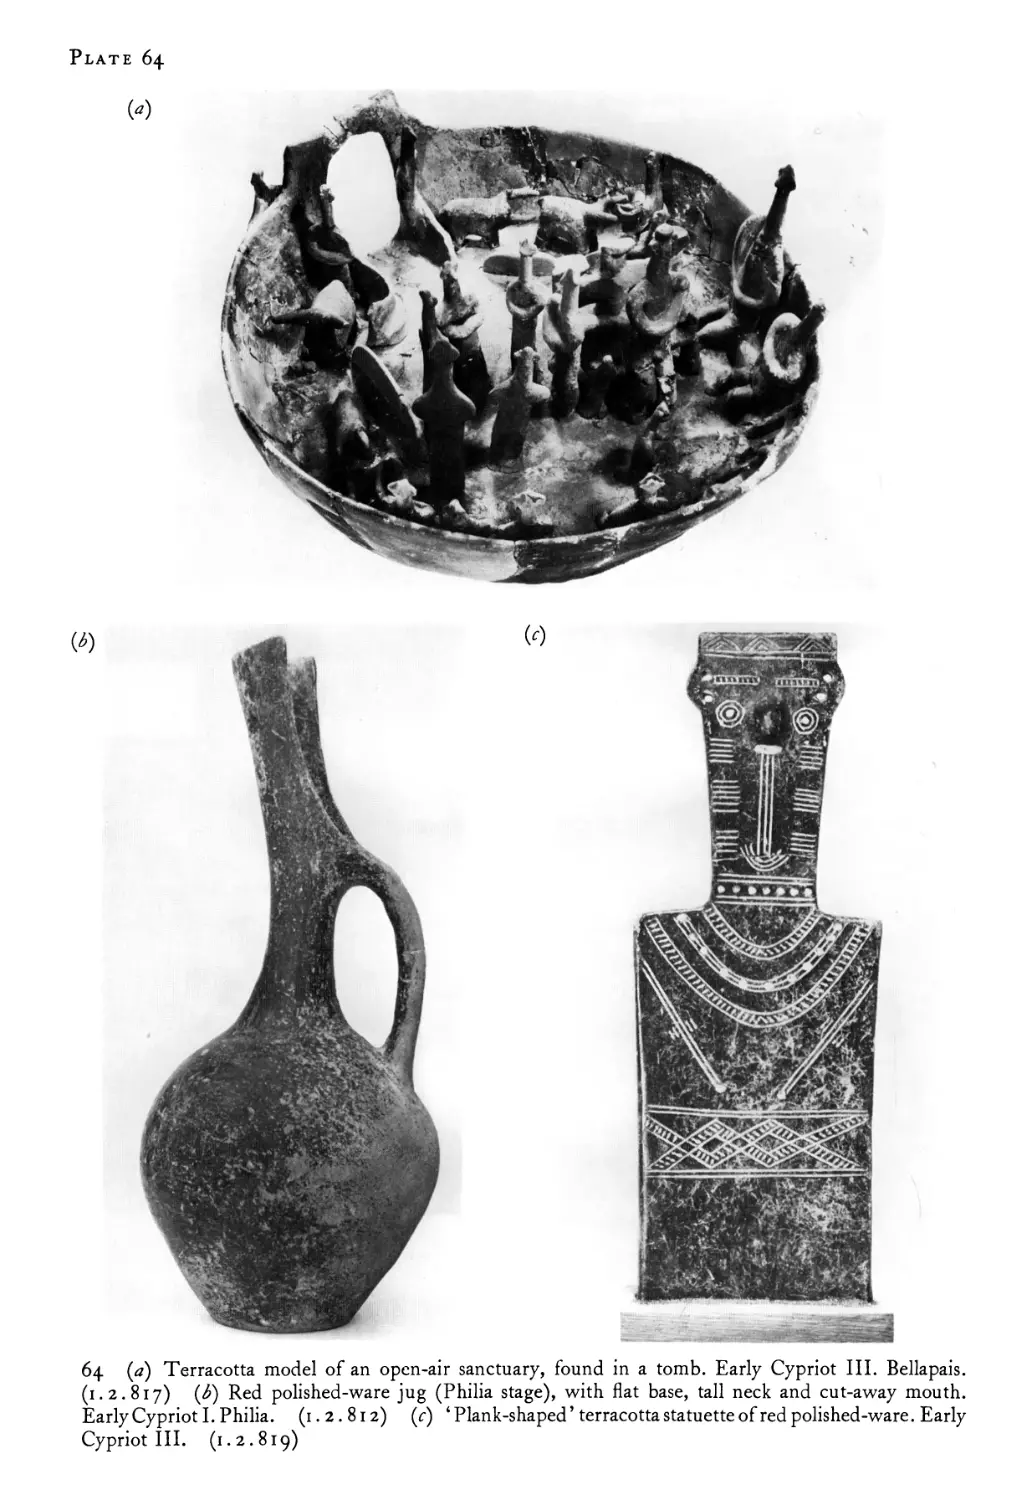 CYPRUS IN THE EARLY BRONZE AGE